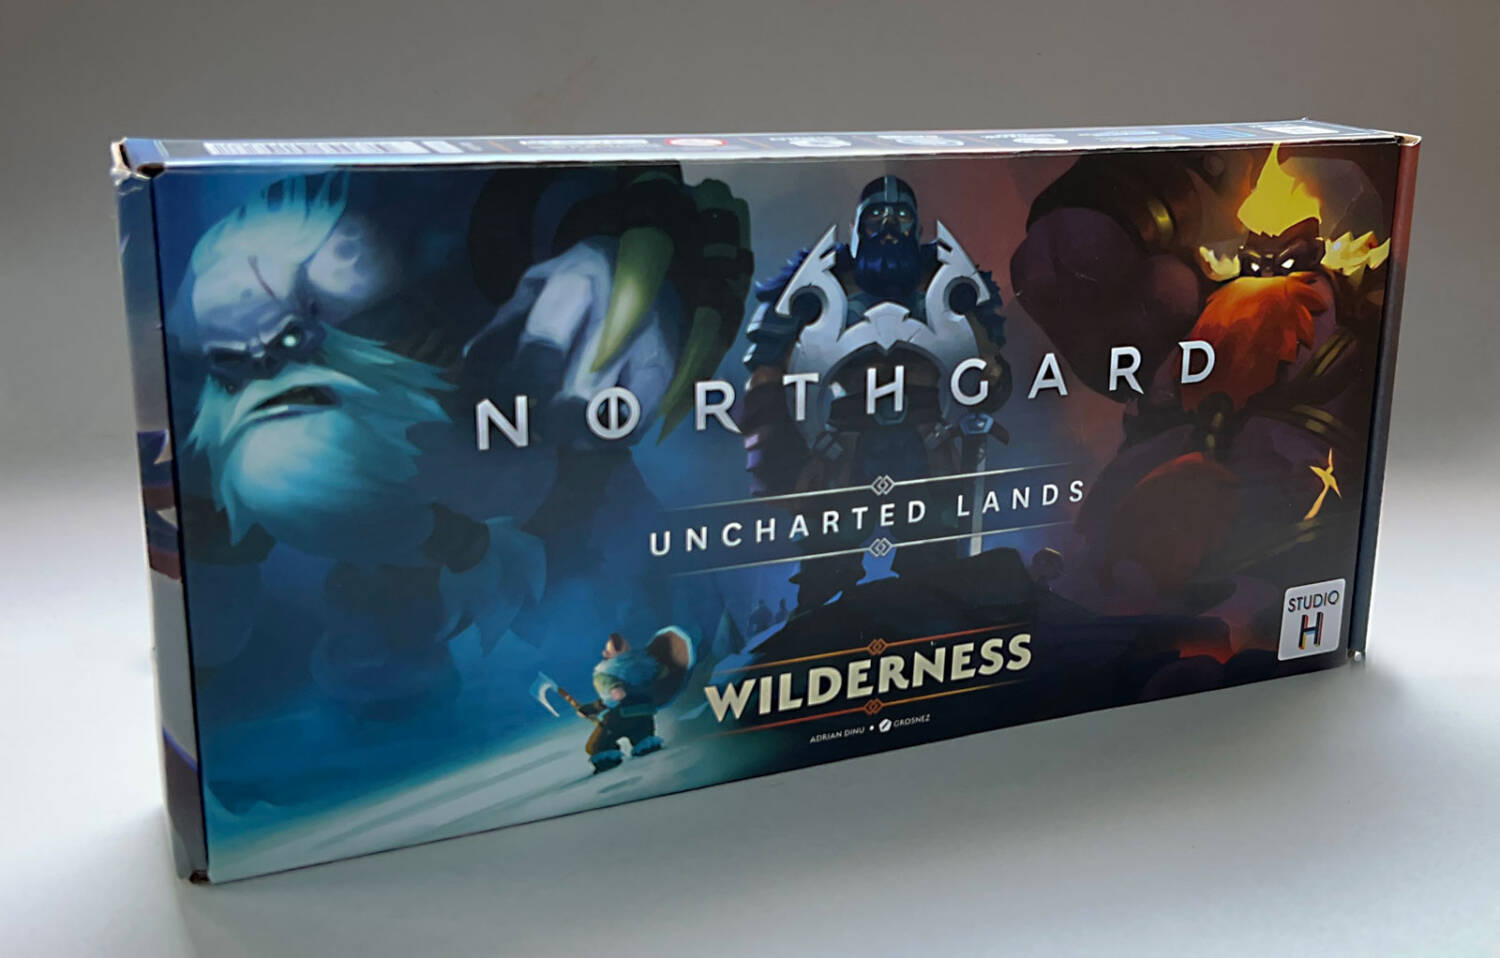 The long, narrow Wilderness Expansion box